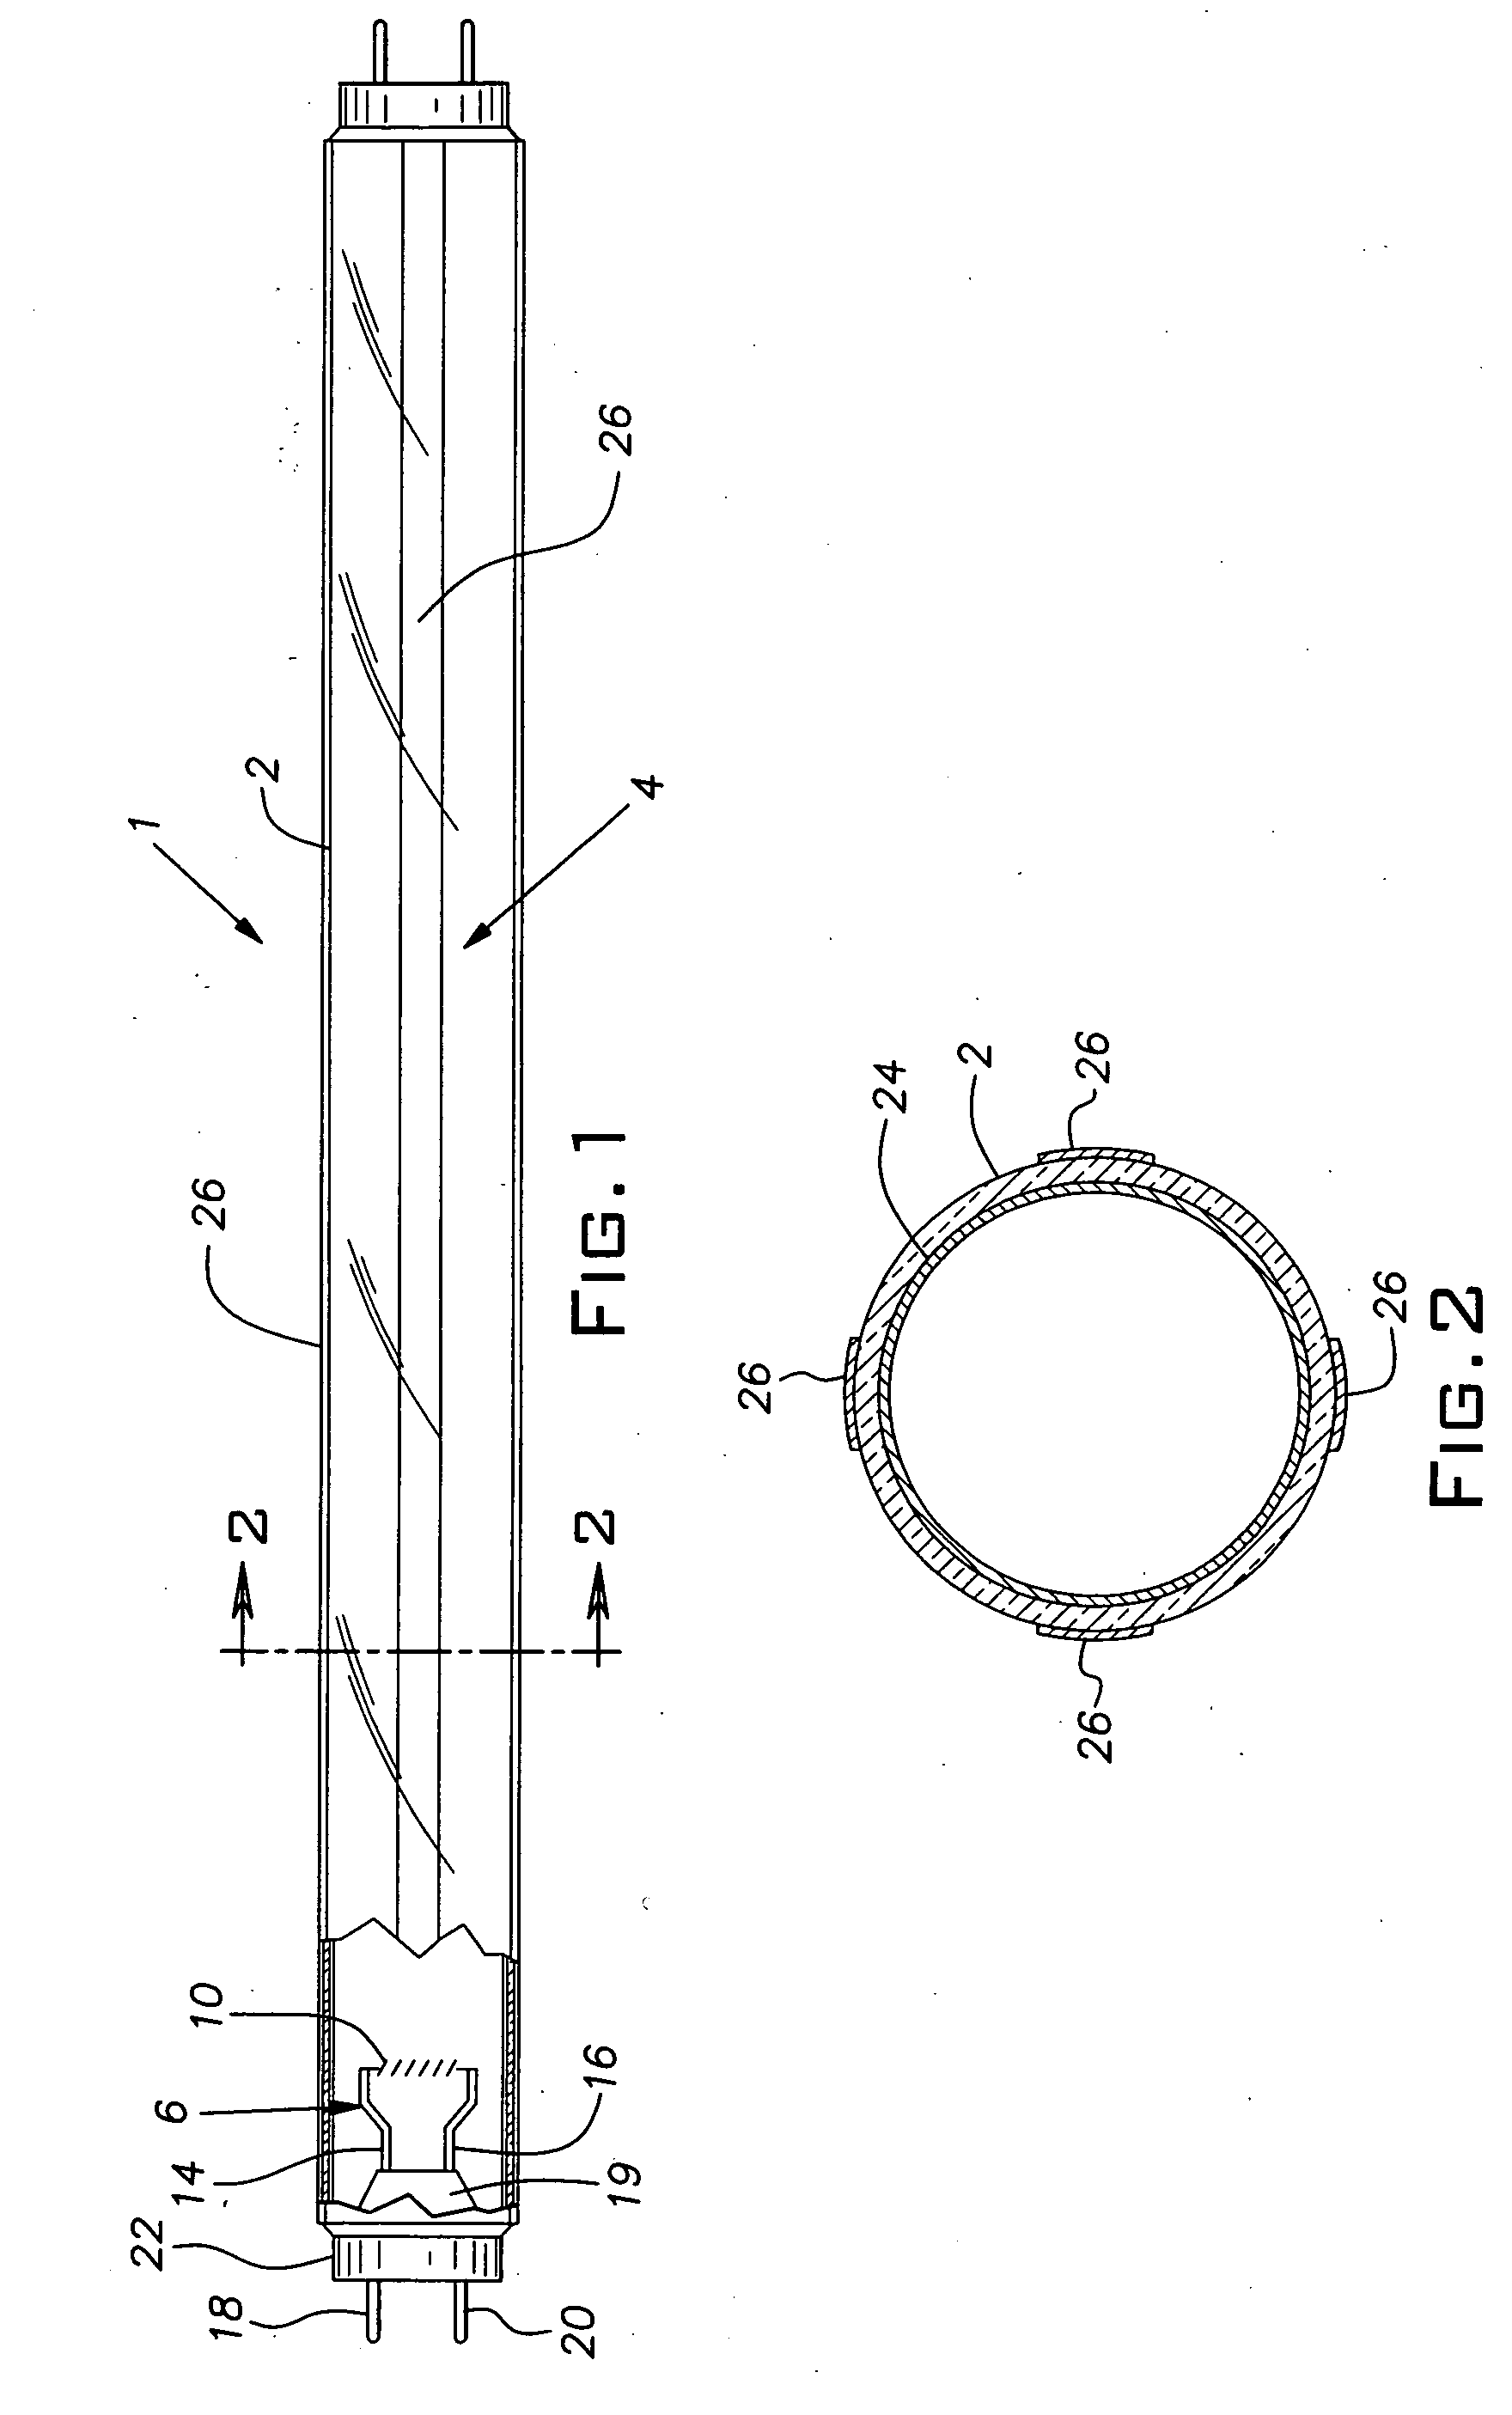 Fluorescent lamp with conductive coating